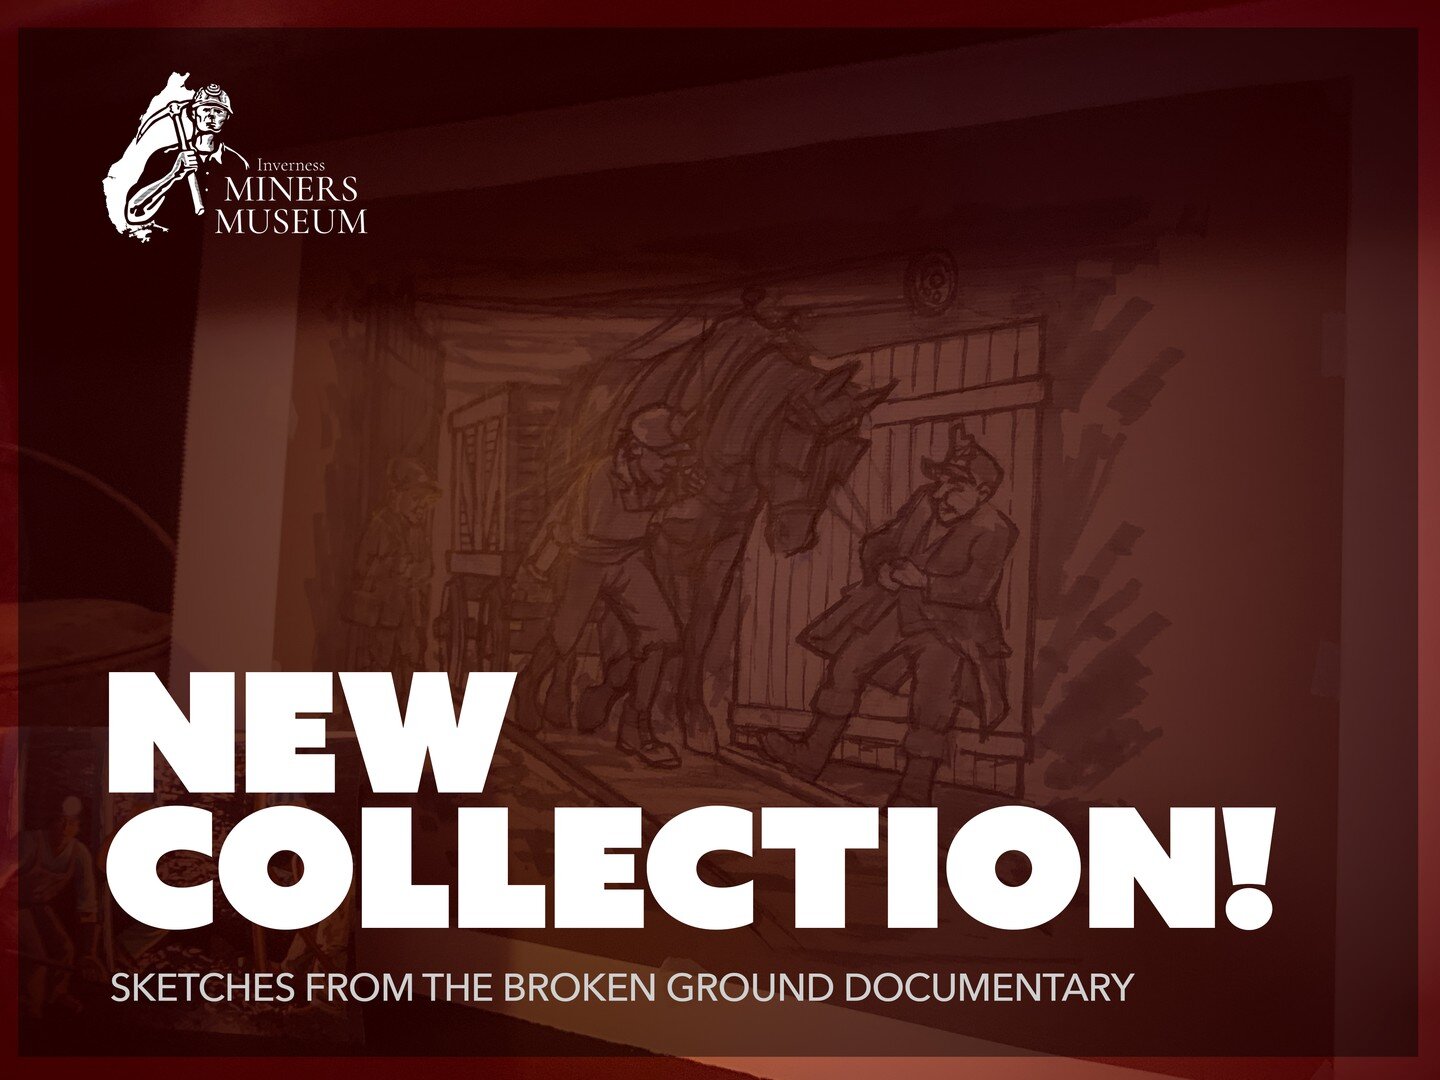 New collection! 

For the remainder of the summer, Terry MacDonald's sketches from #thebrokengrounddocumentary will be displayed throughout the museum. Come on by and see them for yourself.

Watch the film:
invernessminersmuseum.com/docs

Plan your v